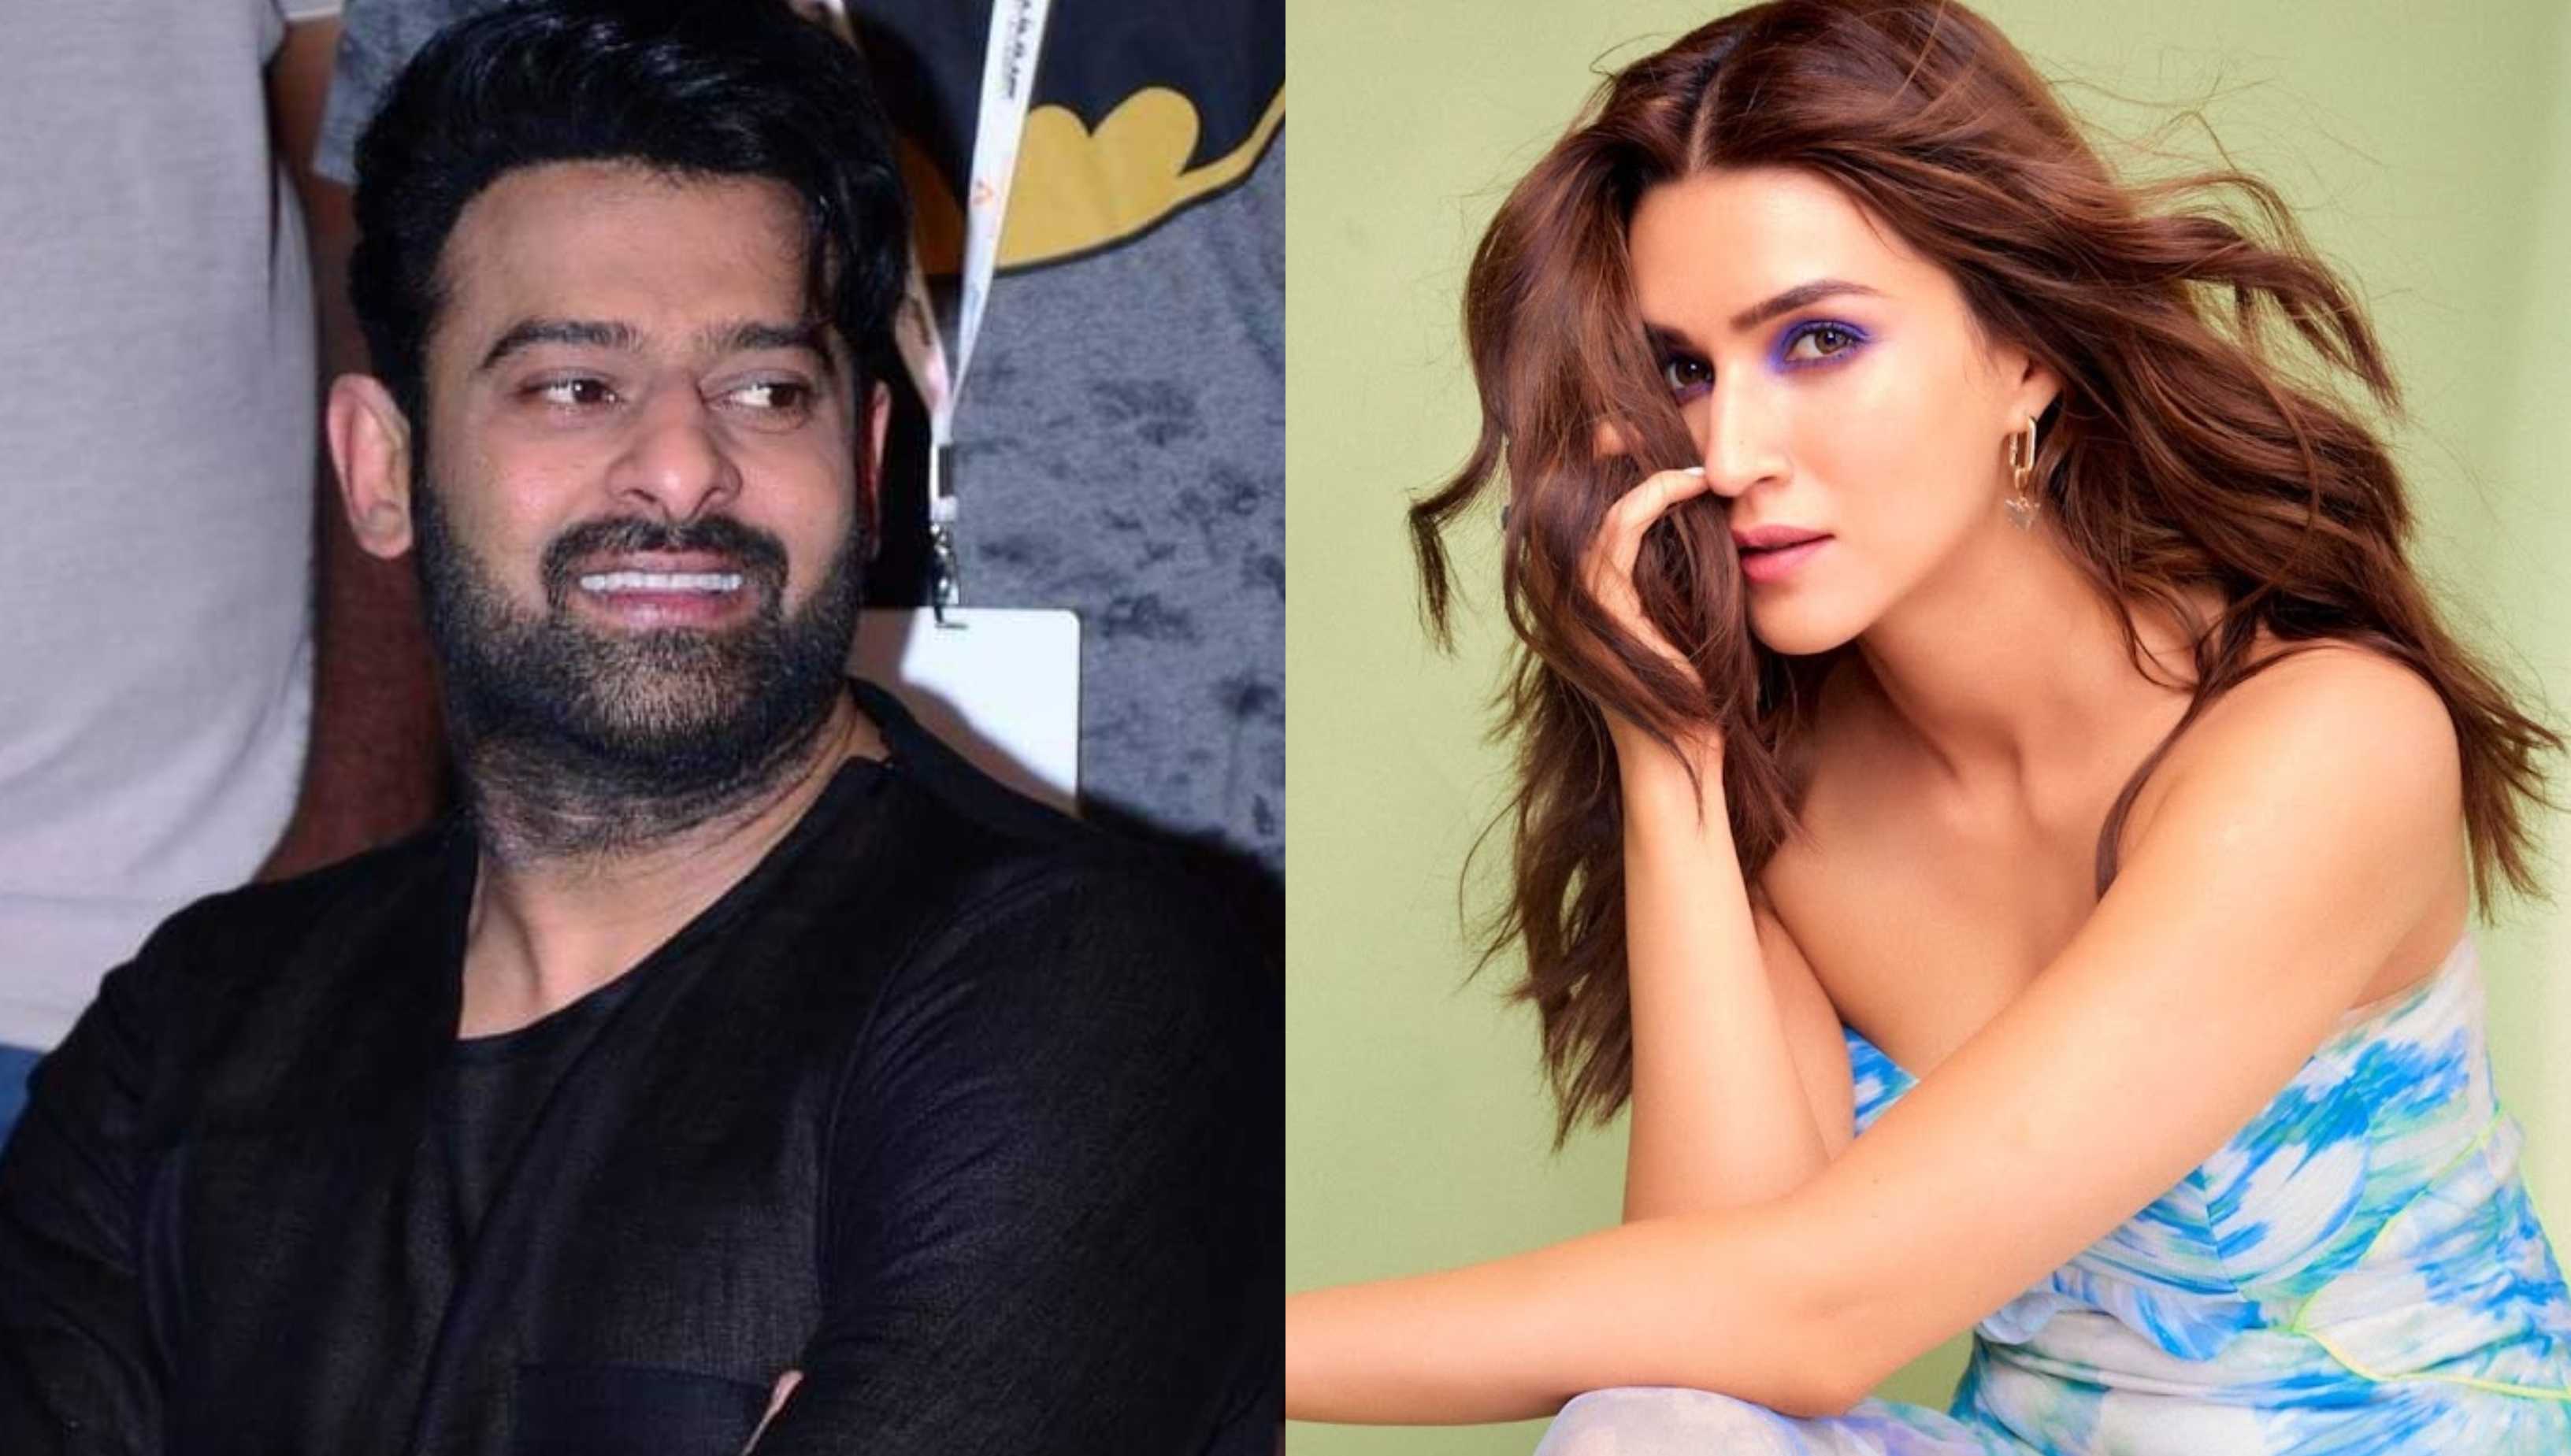 Are Kriti Sanon and Prabhas really in love or is this a publicity stunt for Adipurush? Here’s what we know